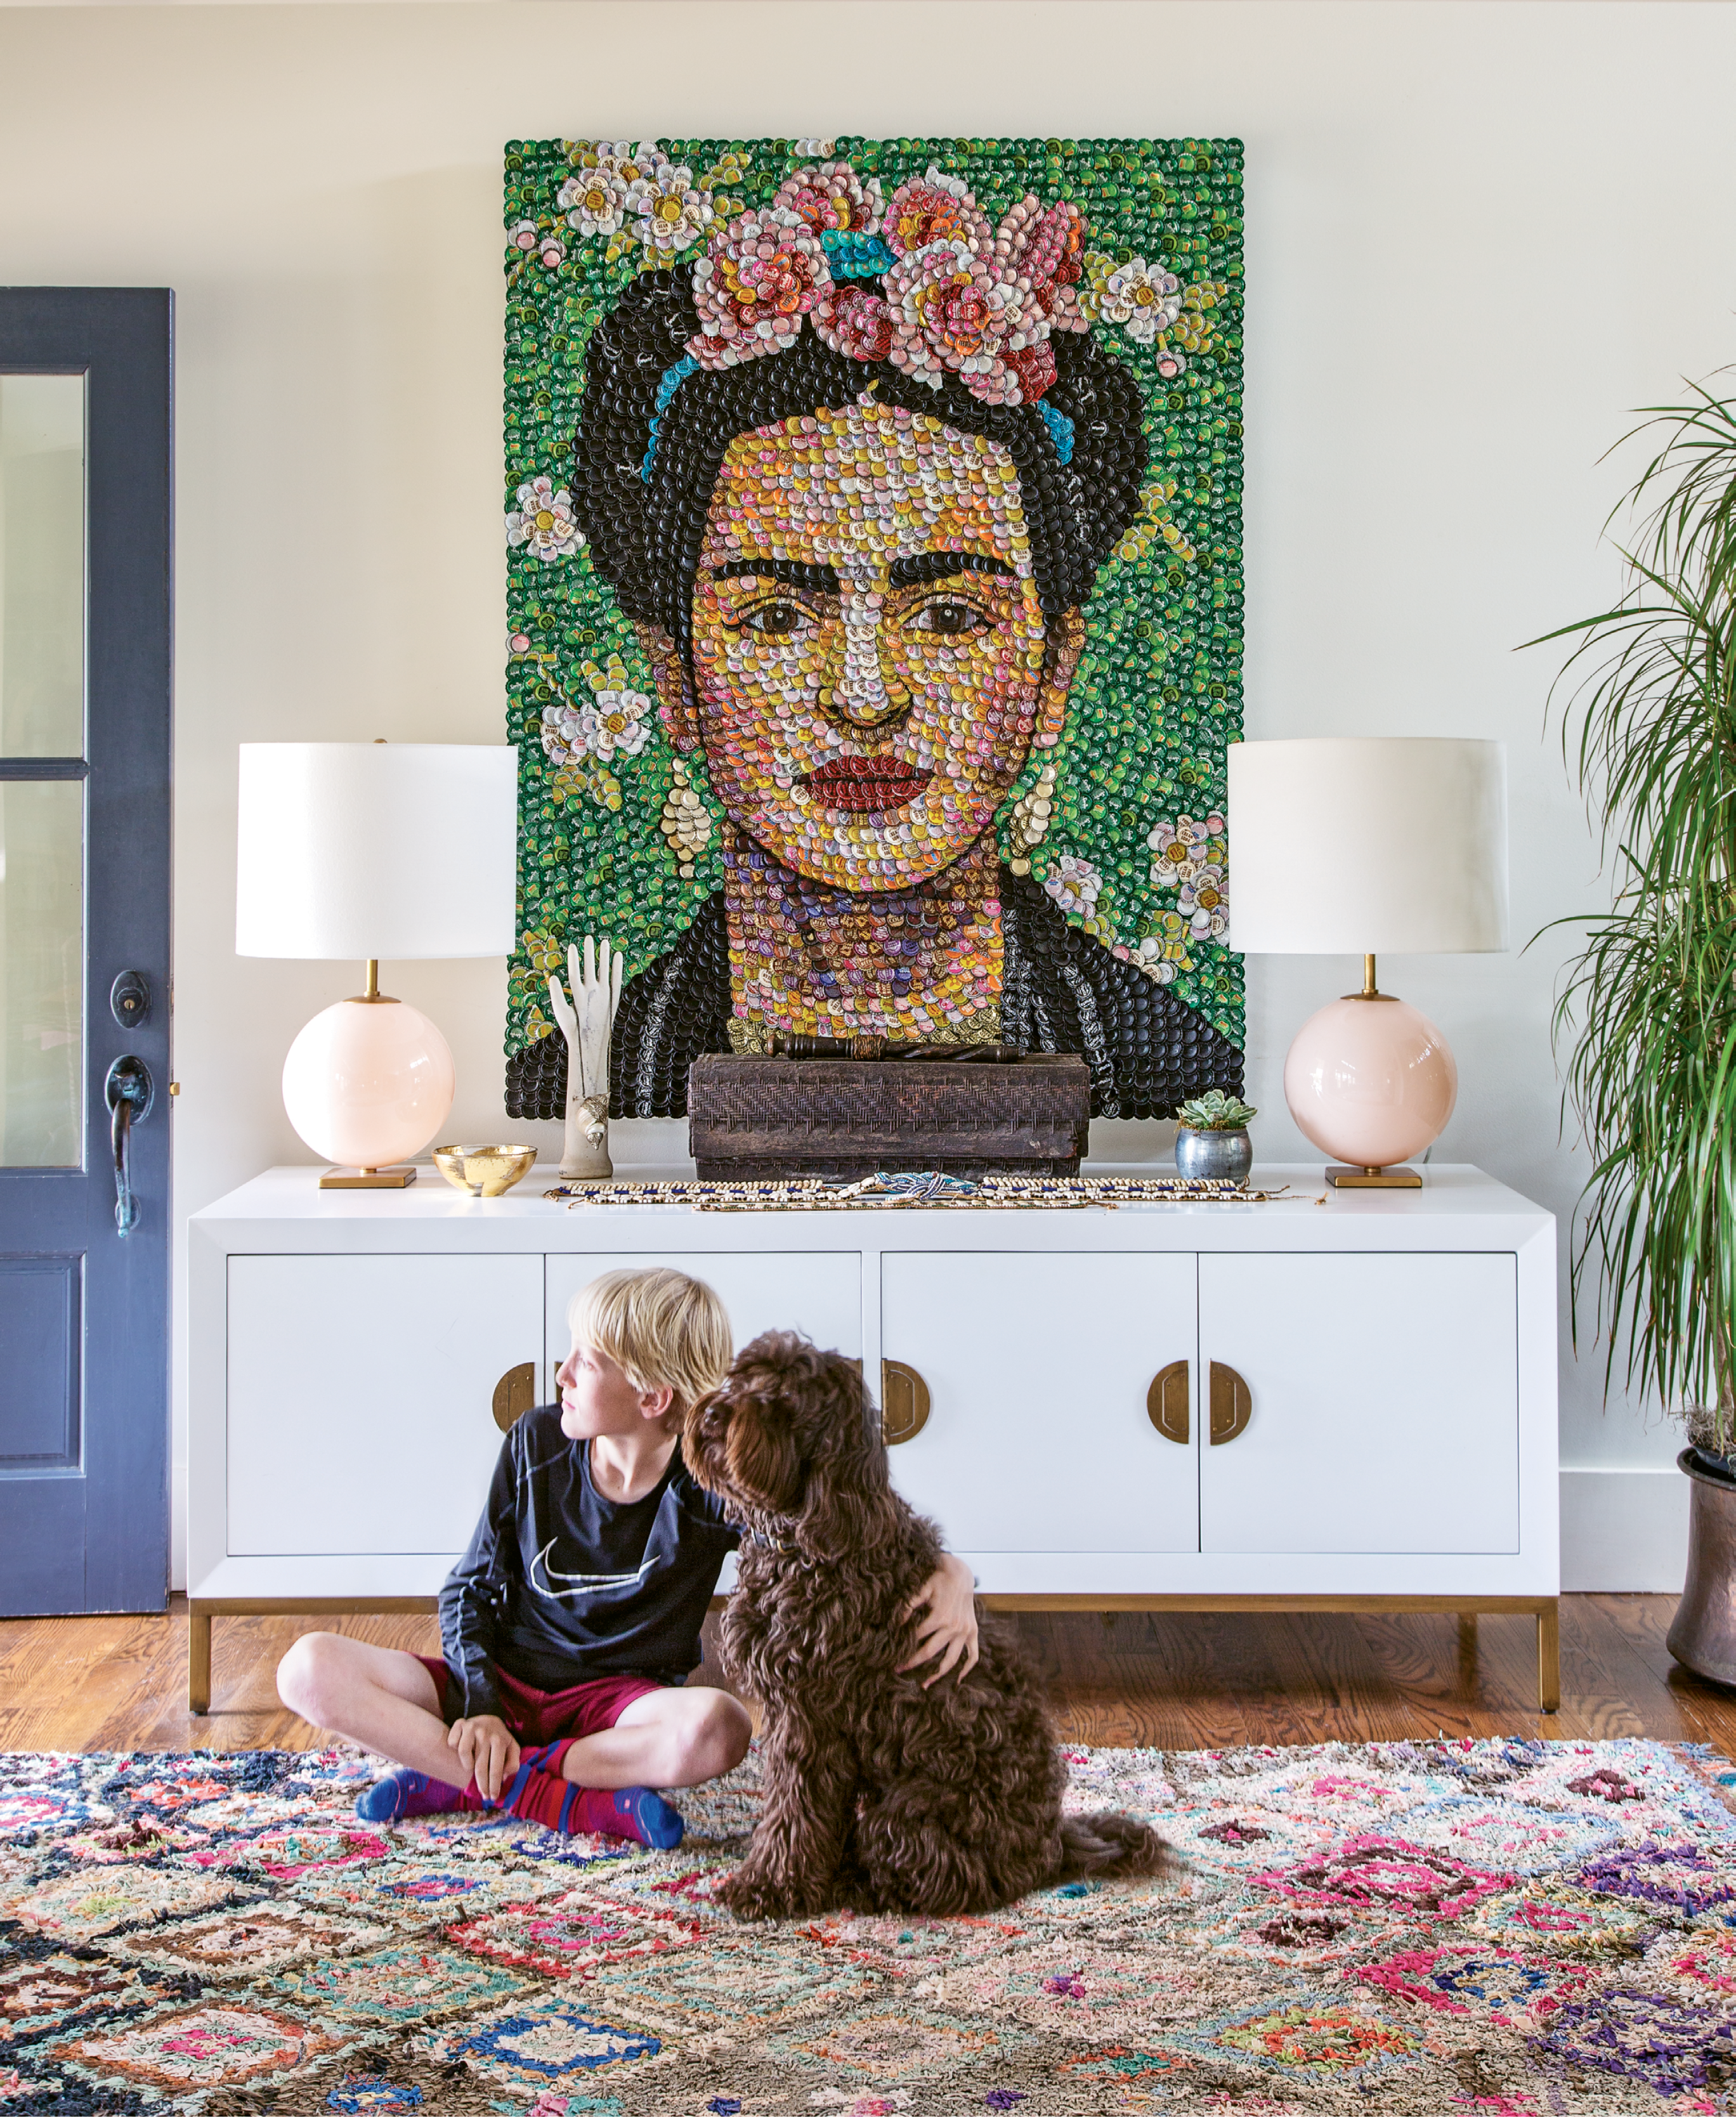 Captivating Entry: Colorful and joy-filled artwork, like this bottle-cap portrait of Frida Kahlo by area artist Molly B. Right, jives well with the Williamsons’ lively home, as does the open floor plan. “The boys are so dynamic; the level of activity here is insane,” says Allison.